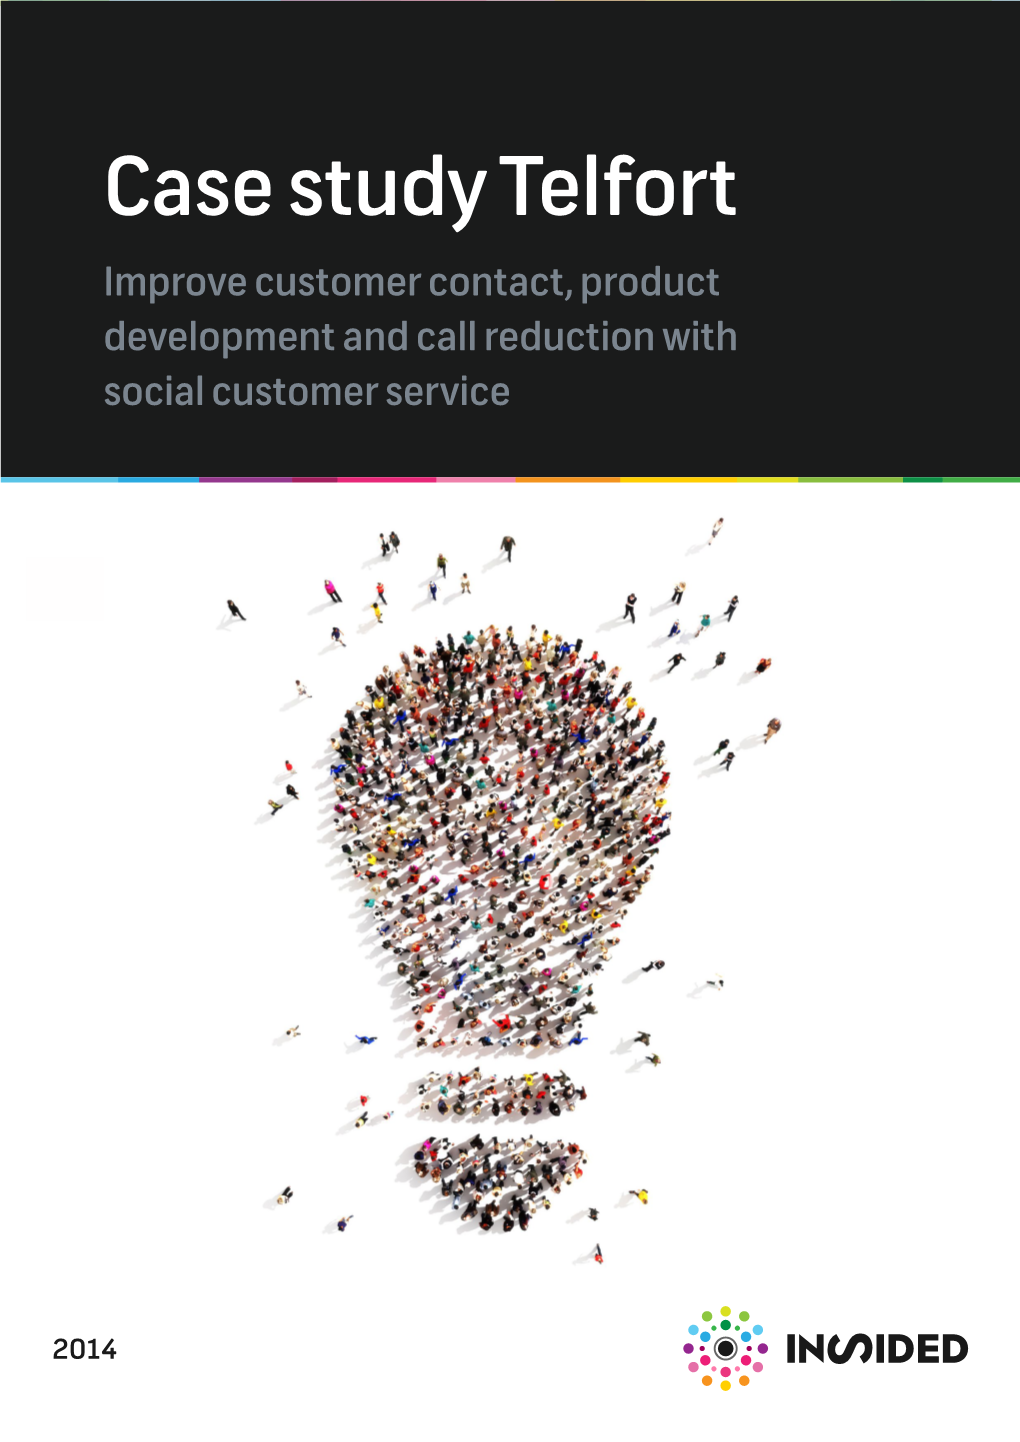 Case Study Telfort Improve Customer Contact, Product Development and Call Reduction with Social Customer Service